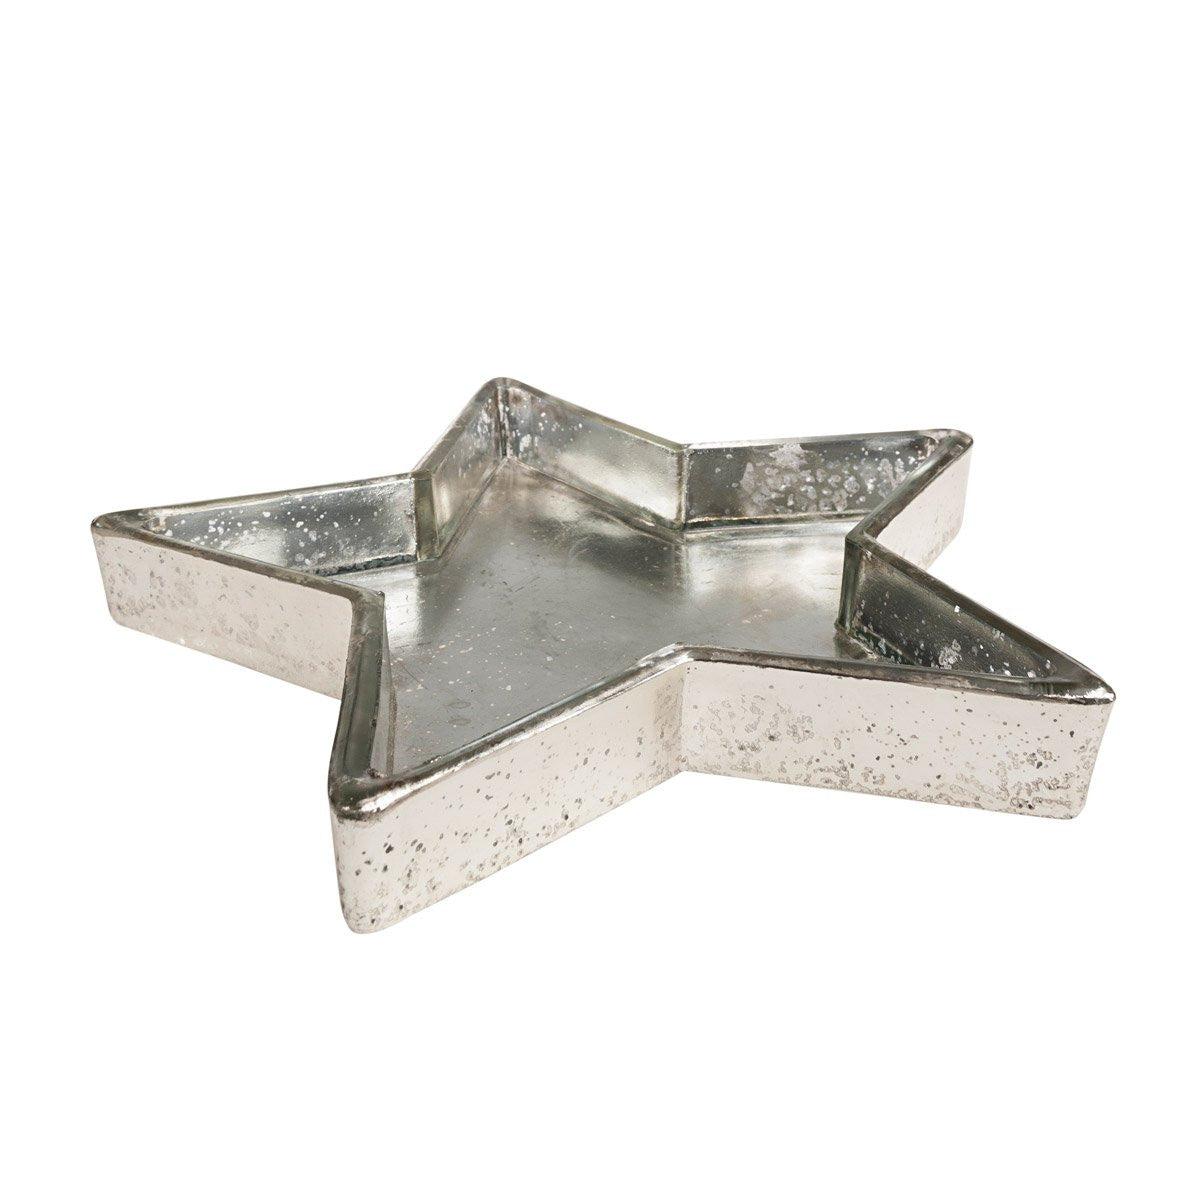 Sophie Allport glass star tray with an antiqued silver finish.